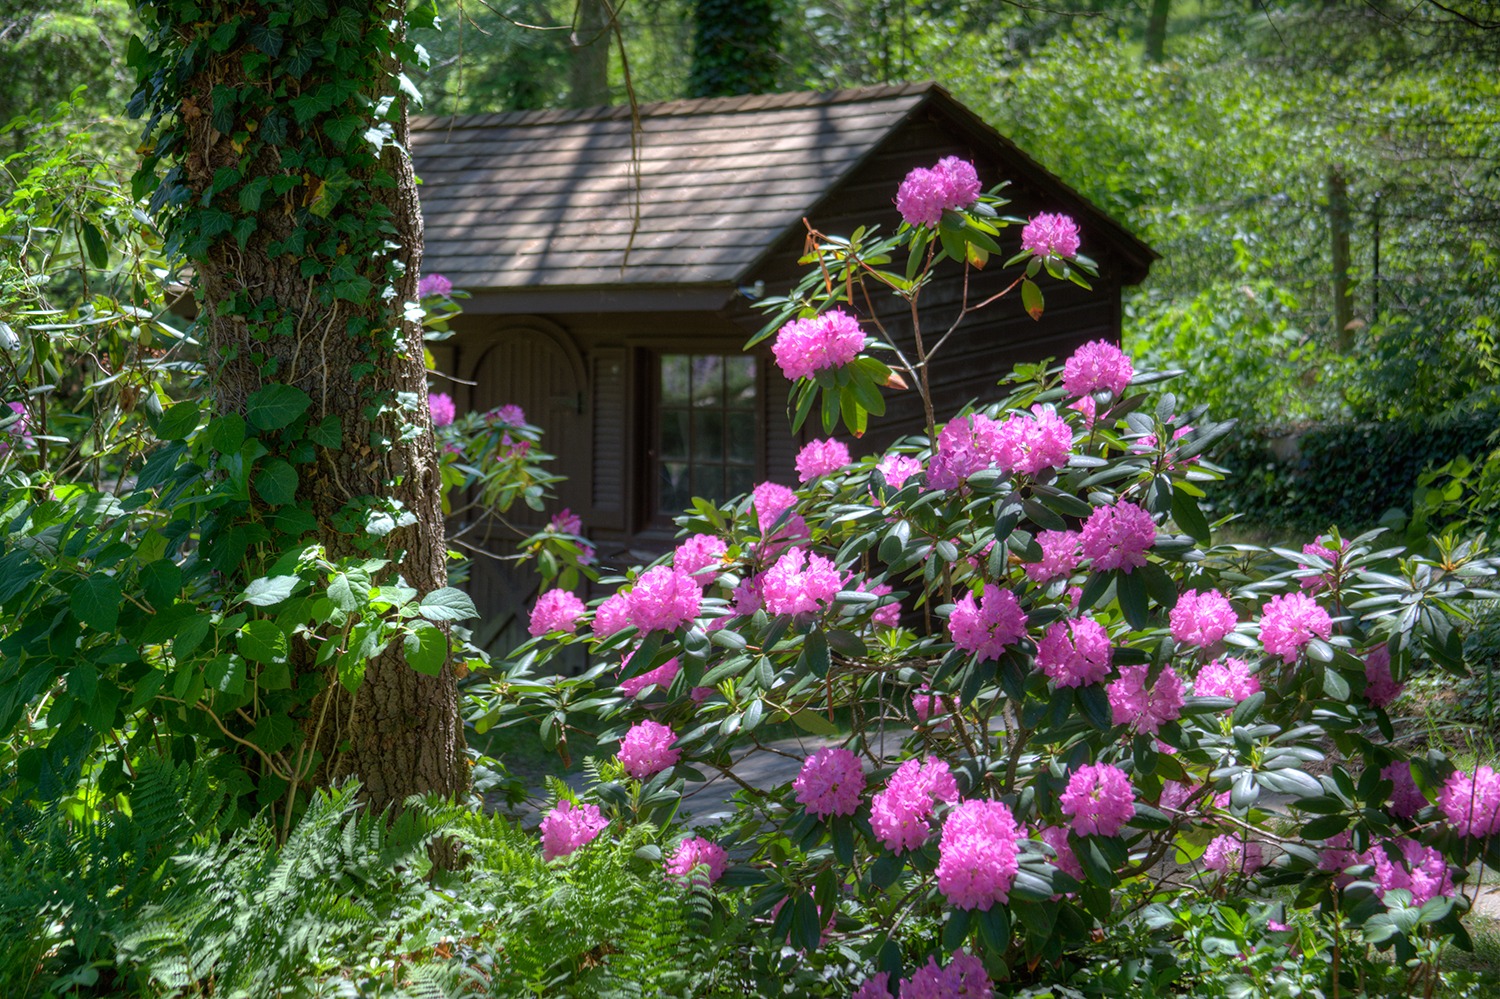 A quaint wooden cabin nestled among lush greenery with vibrant pink rhododendron flowers in the foreground, surrounded by a tranquil forest setting.